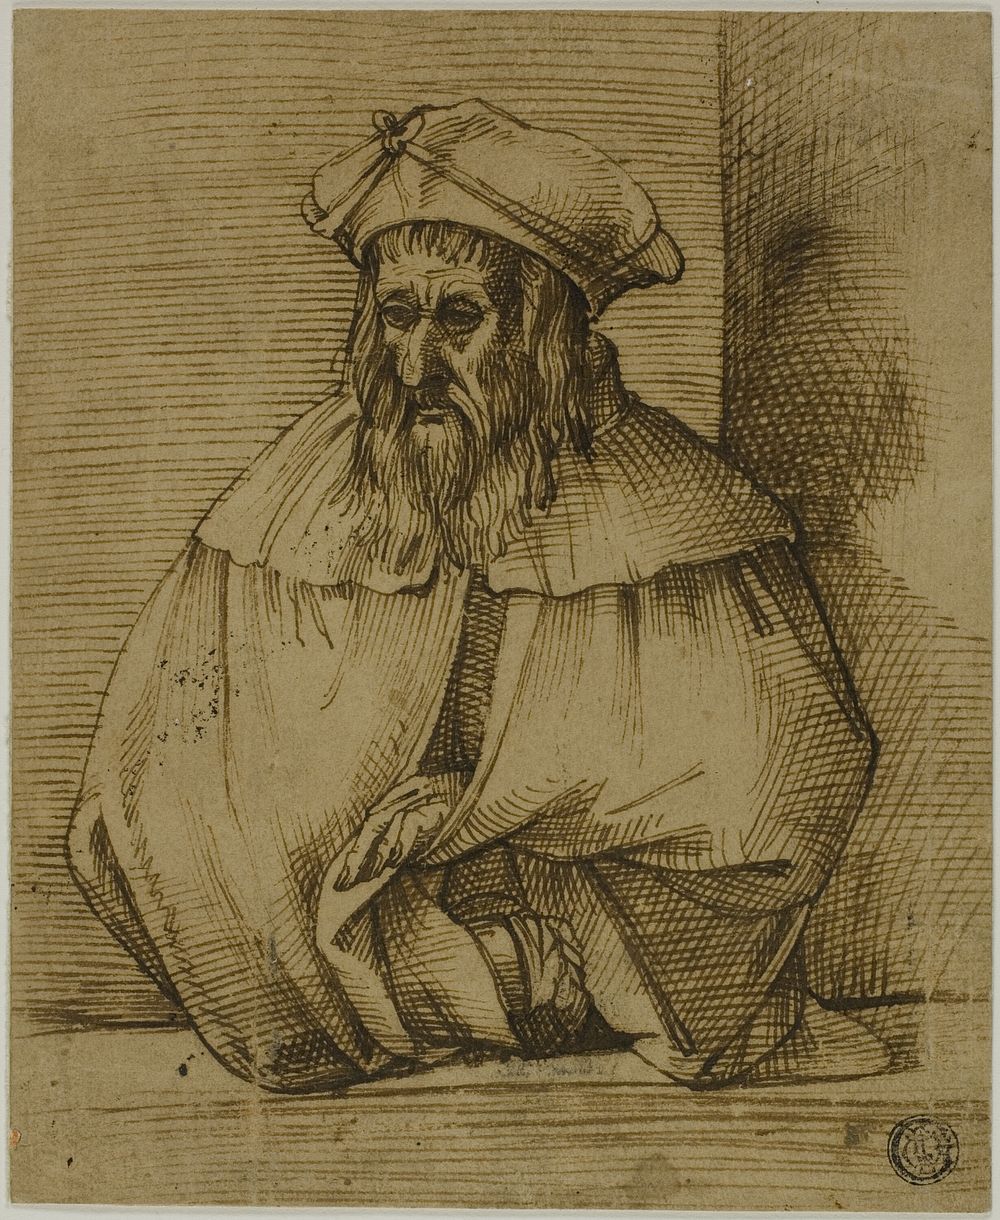 Half-Length Sketch of a Gentleman Wearing Hat and Cape by Bartolomeo Passarotti